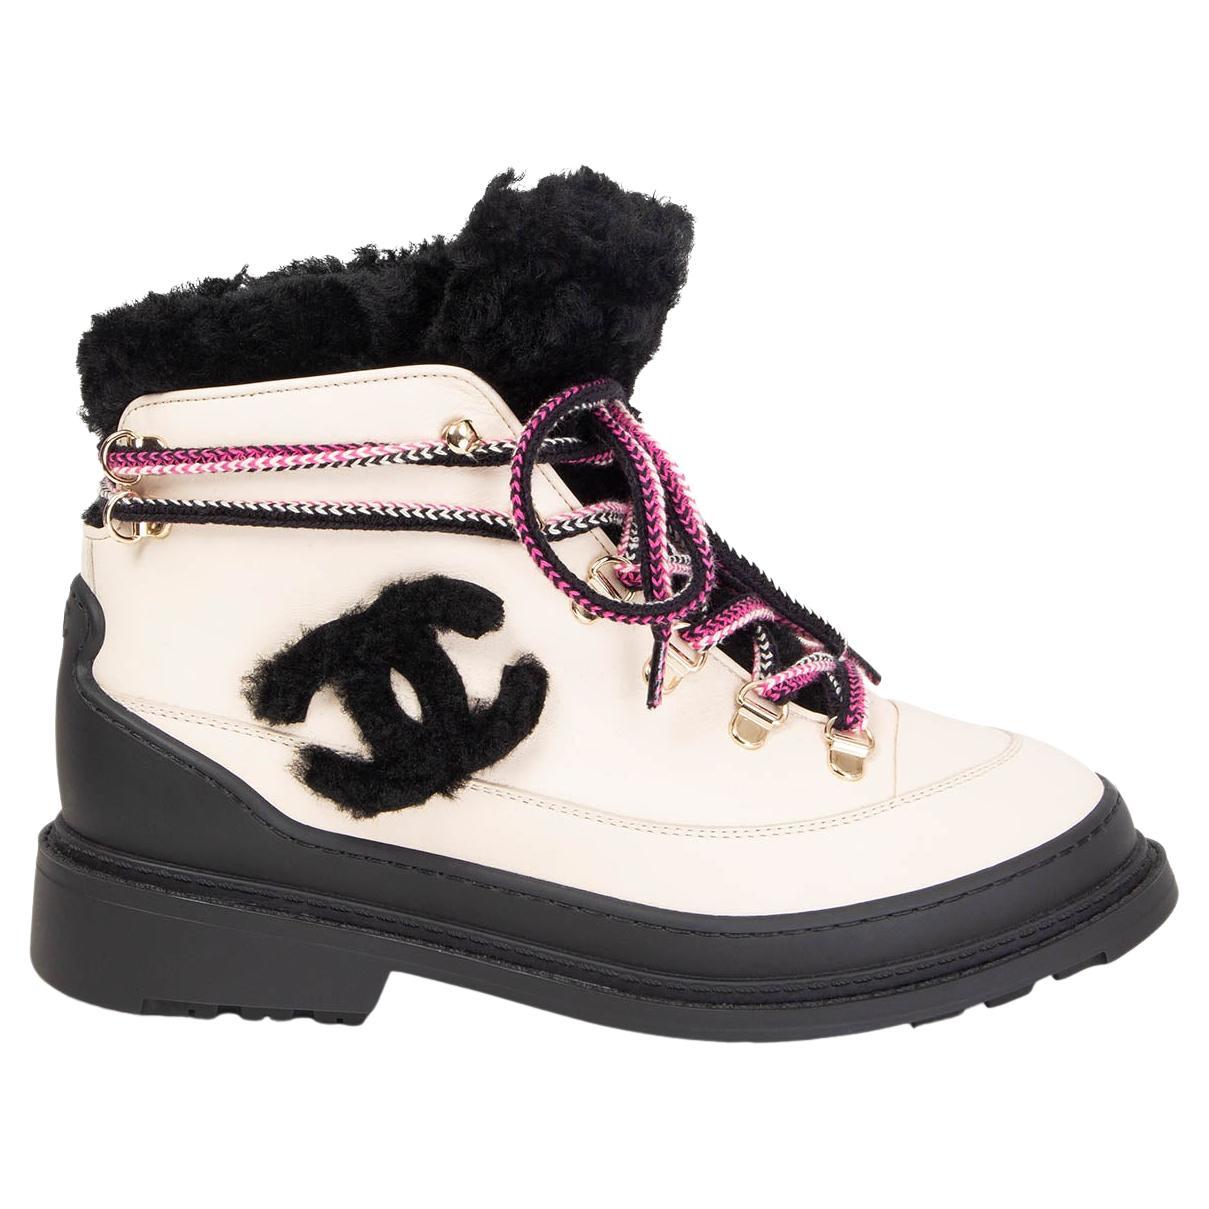 CHANEL ivory leather 2020 SHEARLING LINED LACE UP Boots Shoes 37.5 20A For Sale